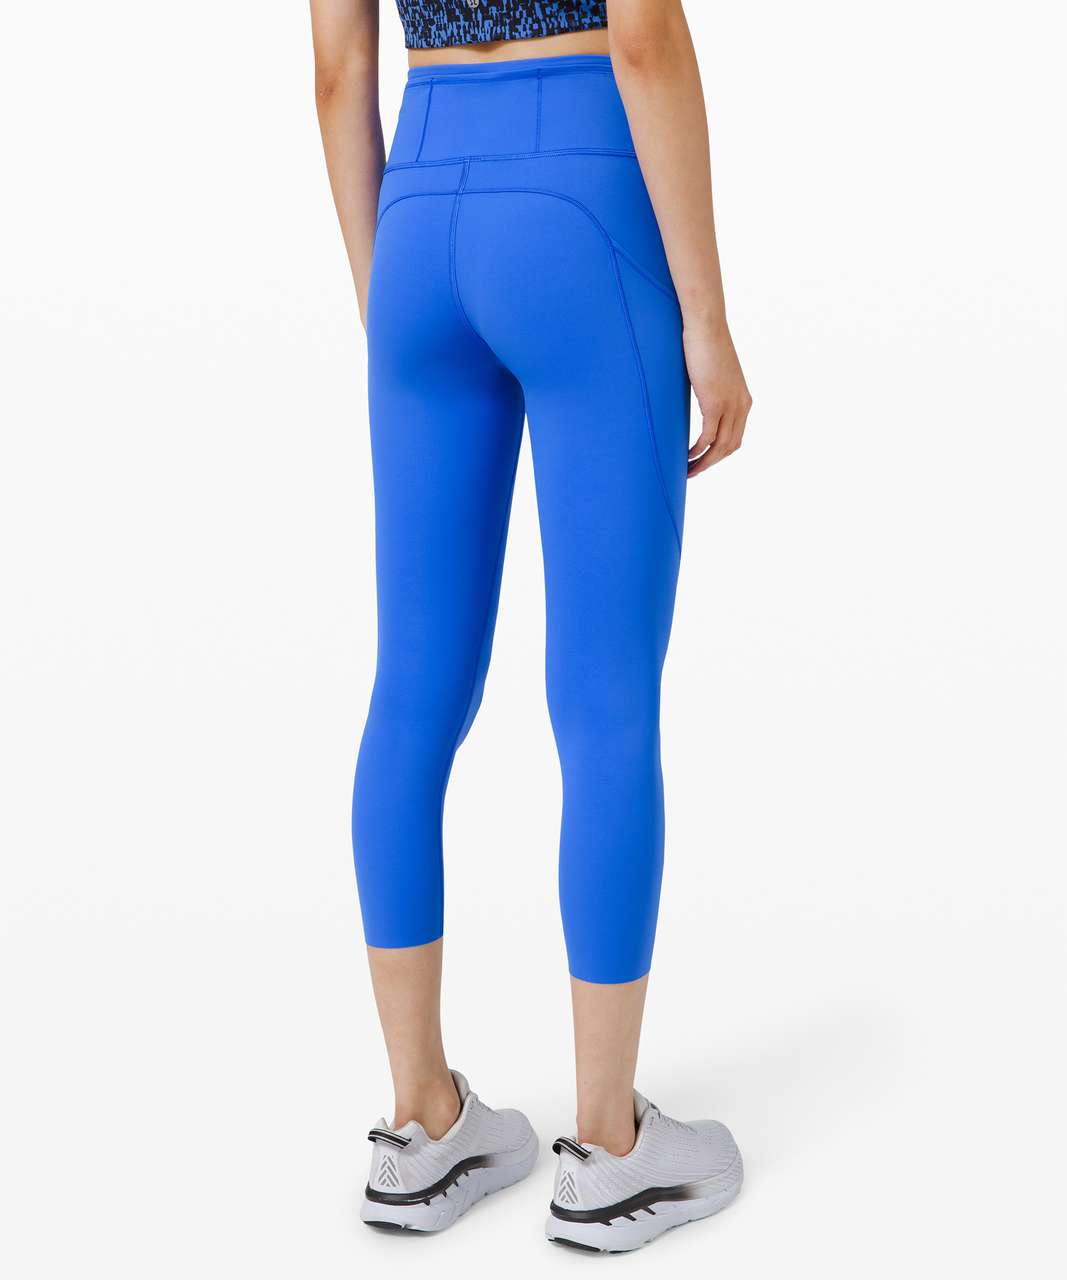 Lululemon Fast and Free High-Rise Crop II 23" *Non-Reflective - Wild Bluebell